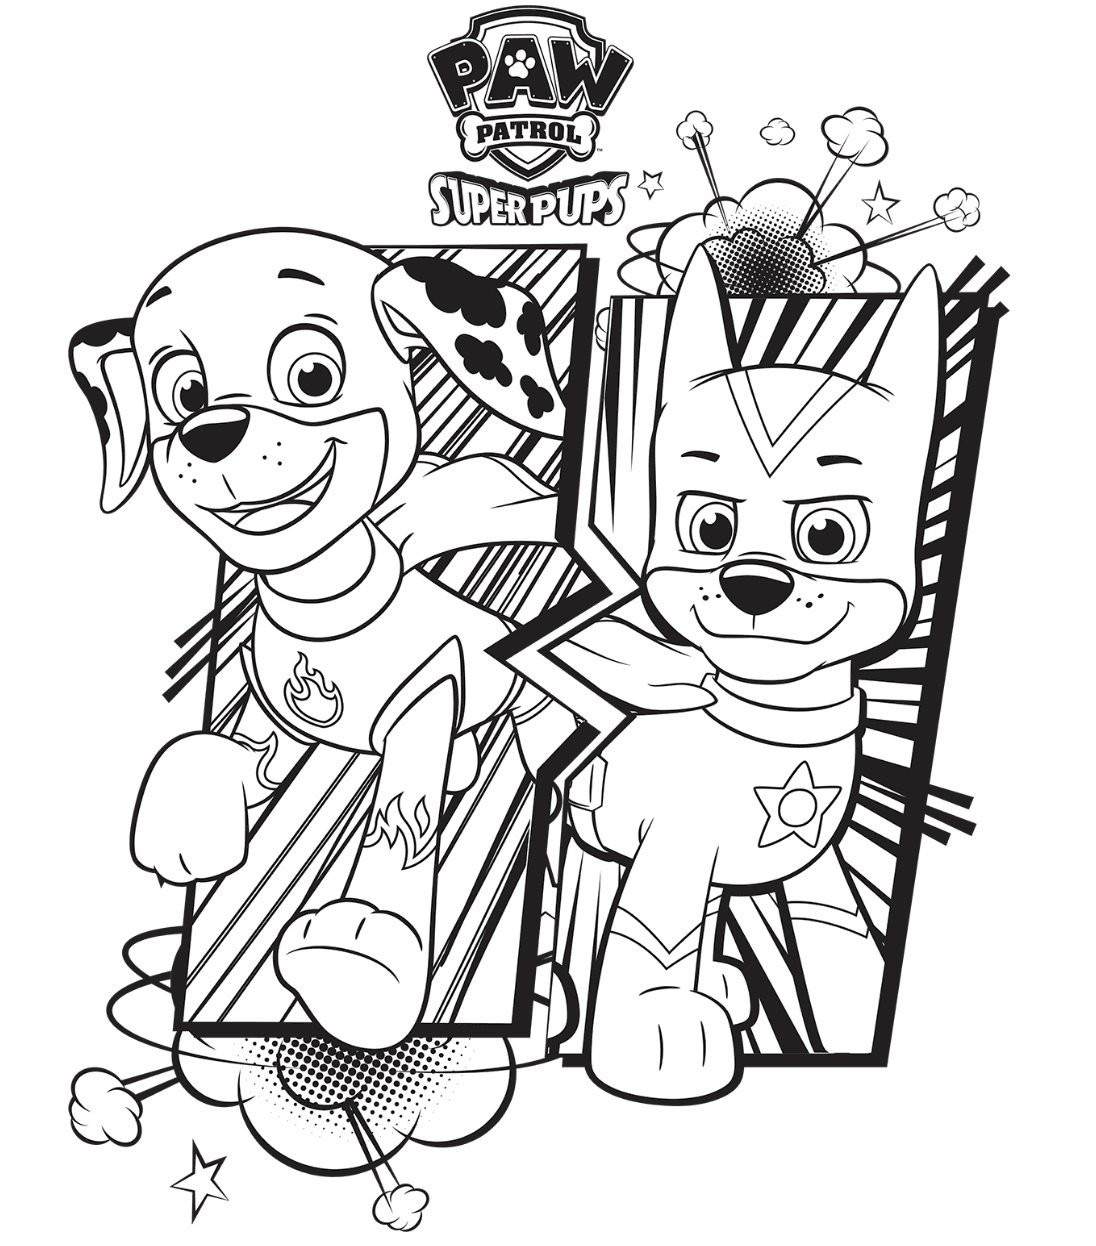 PAWs Colouring Page